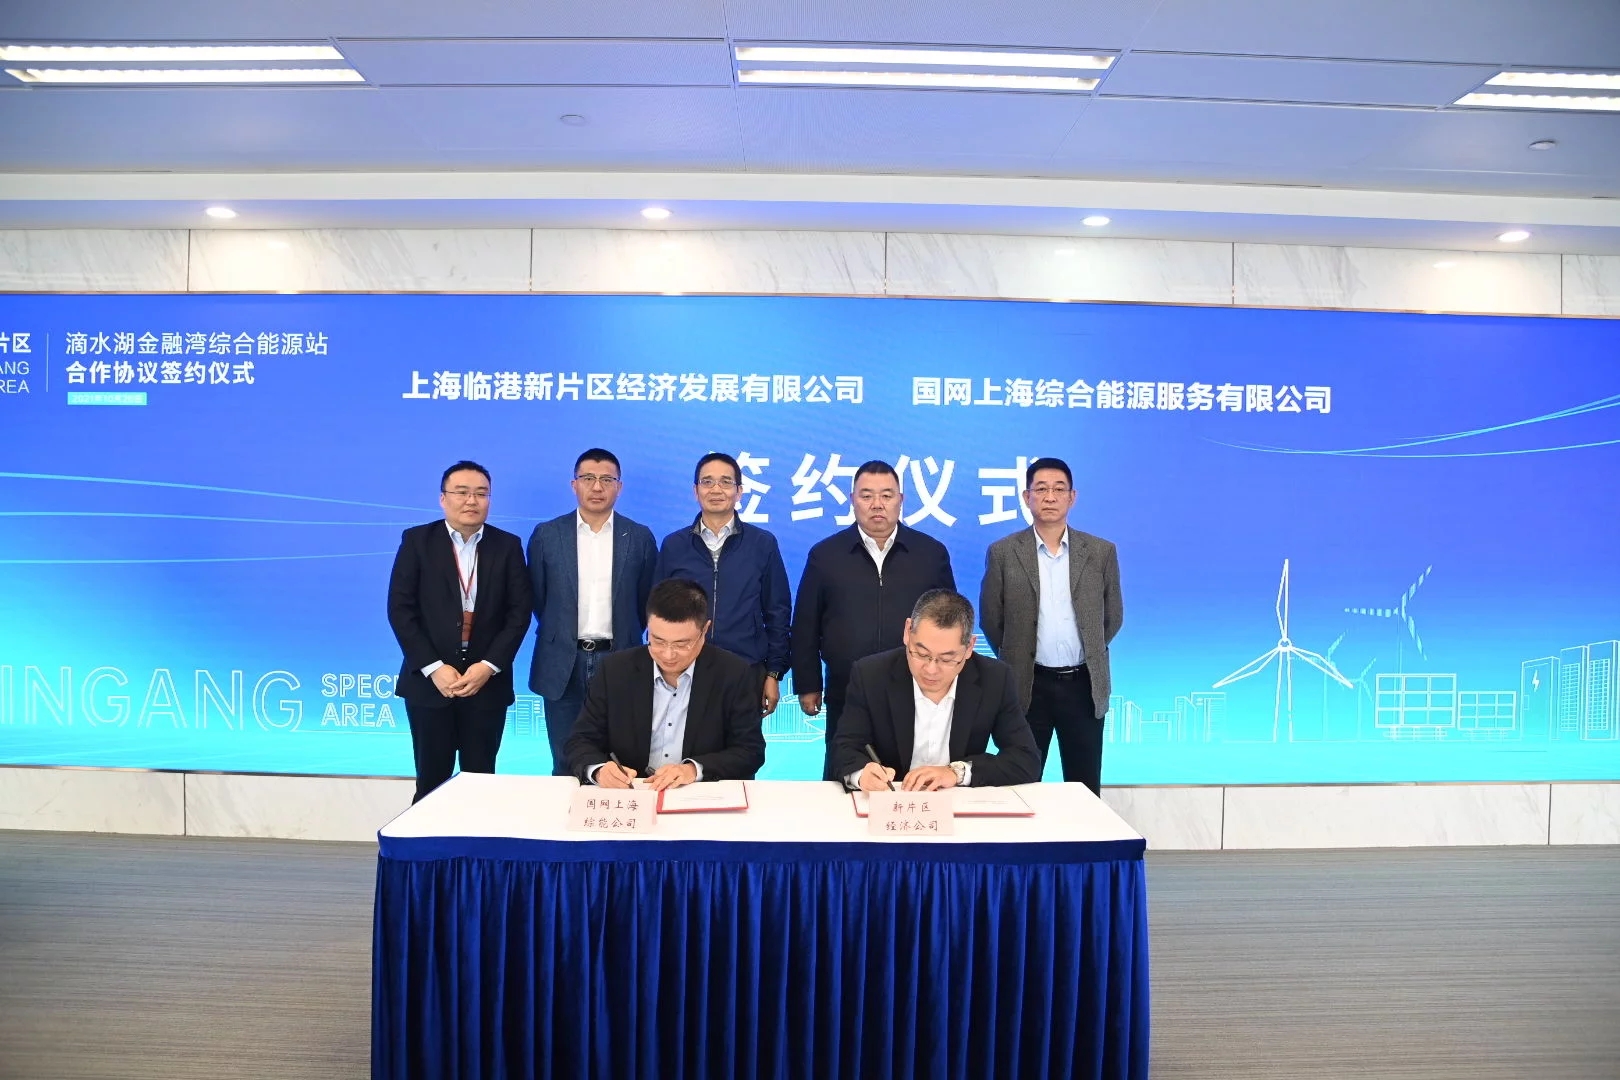 Shanghai's first all-electric integrated energy station project is completed, which can provide nearly 18 million kilowatt-hours of electricity to the power grid